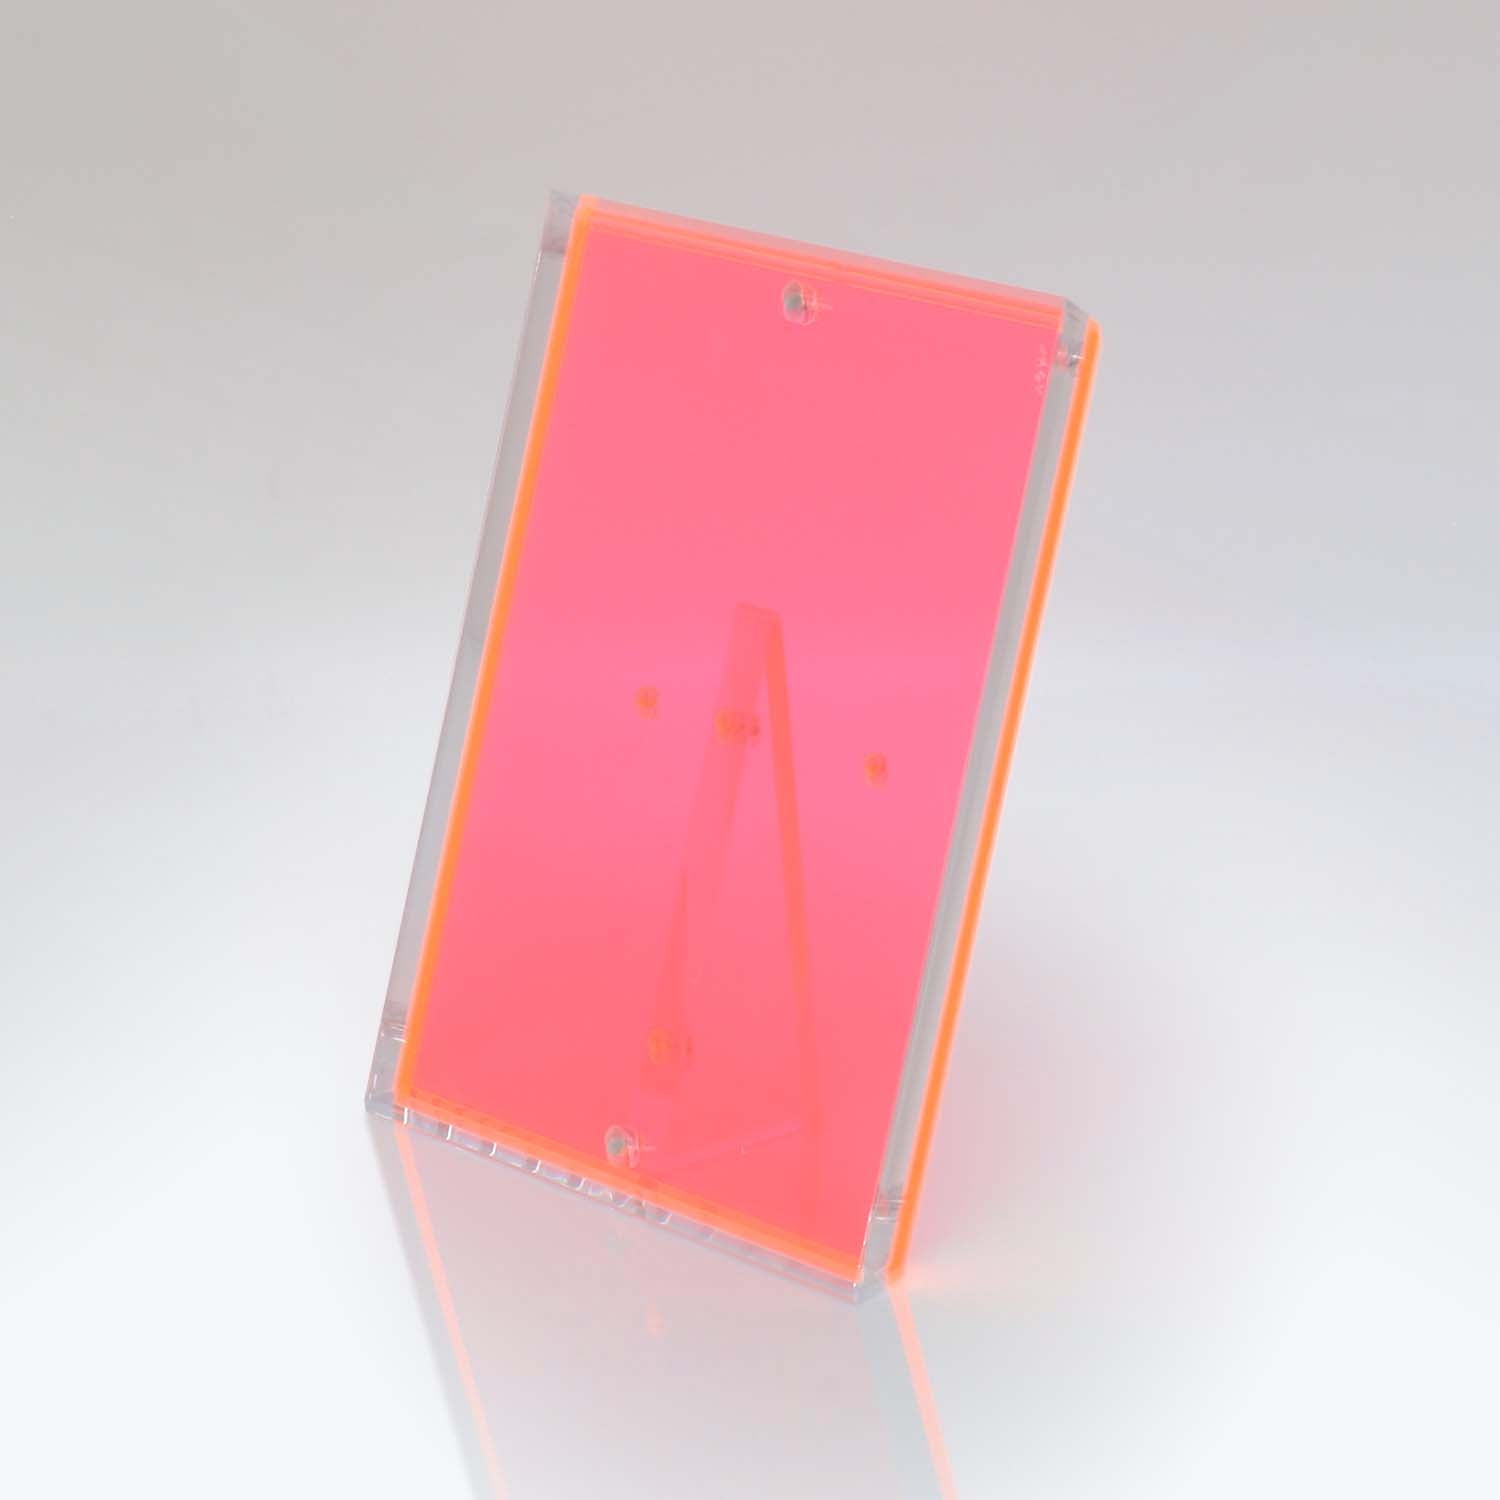 Transparent pink stand with 'A' shape design for displaying items